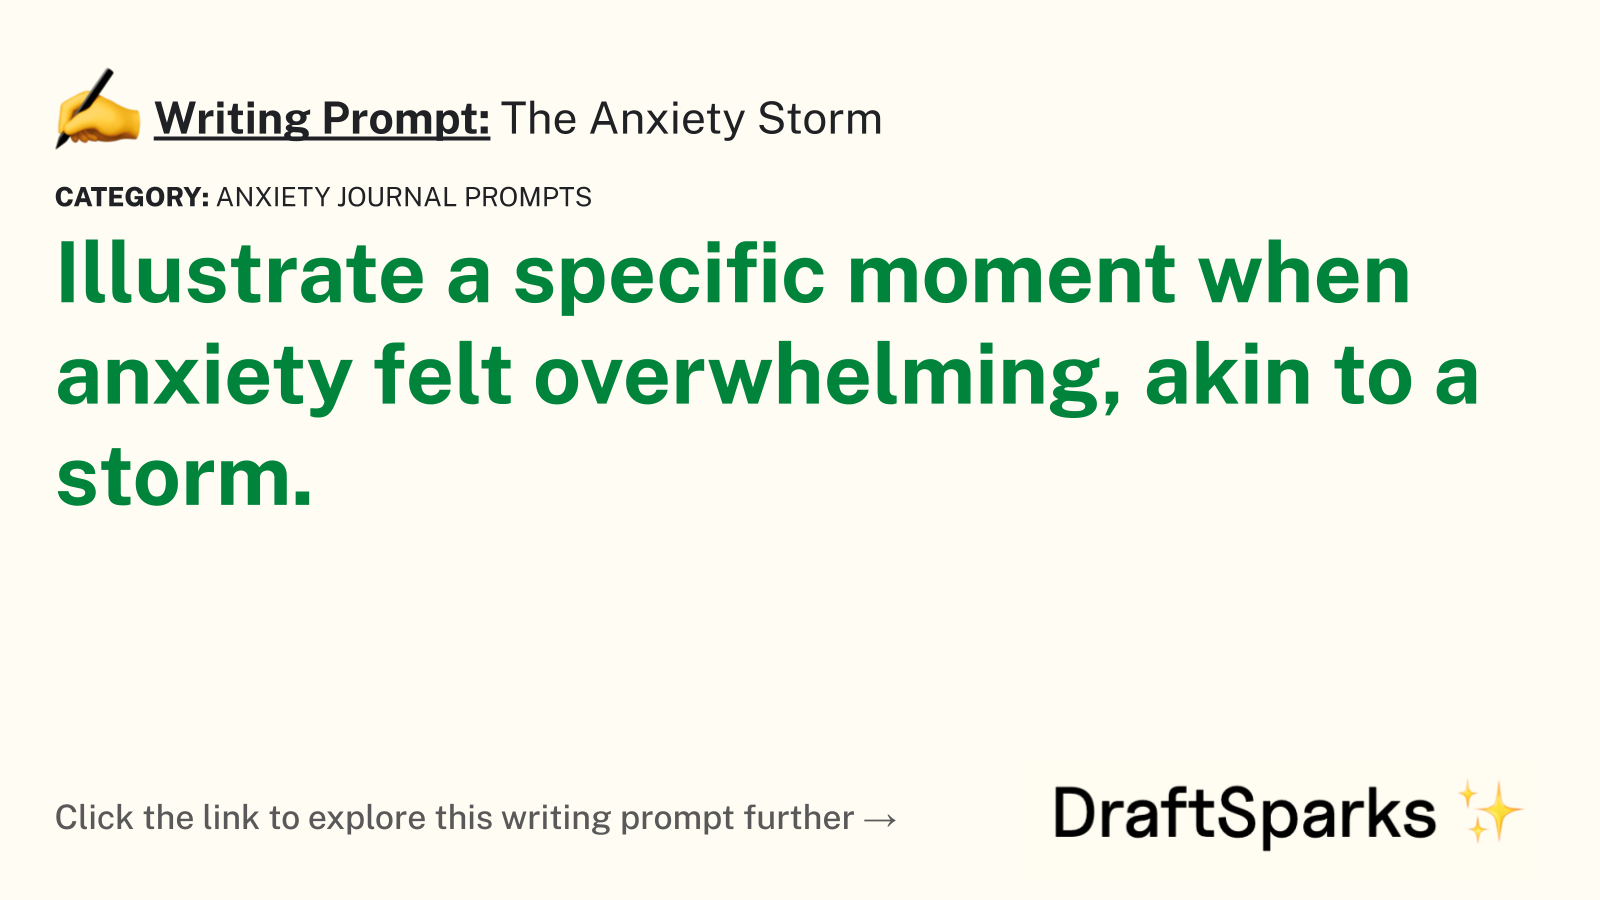 The Anxiety Storm